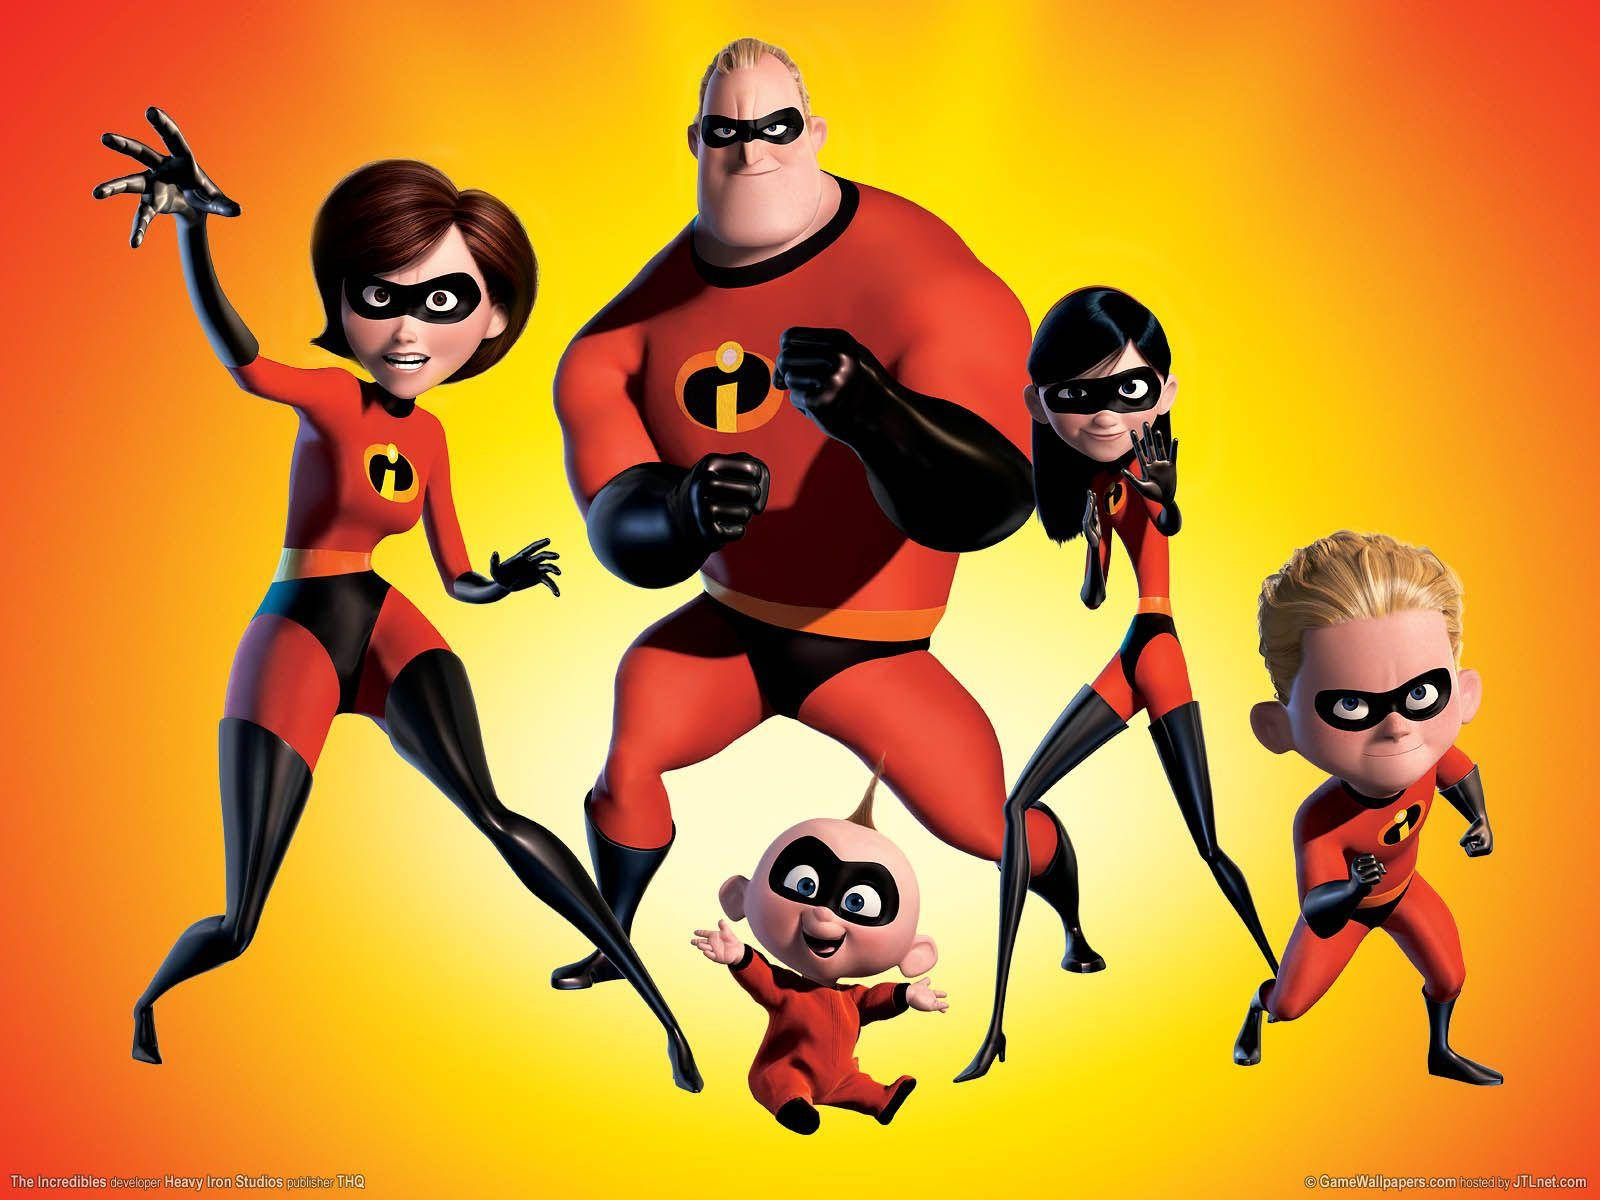 The Incredibles - Ready For Action Wallpaper